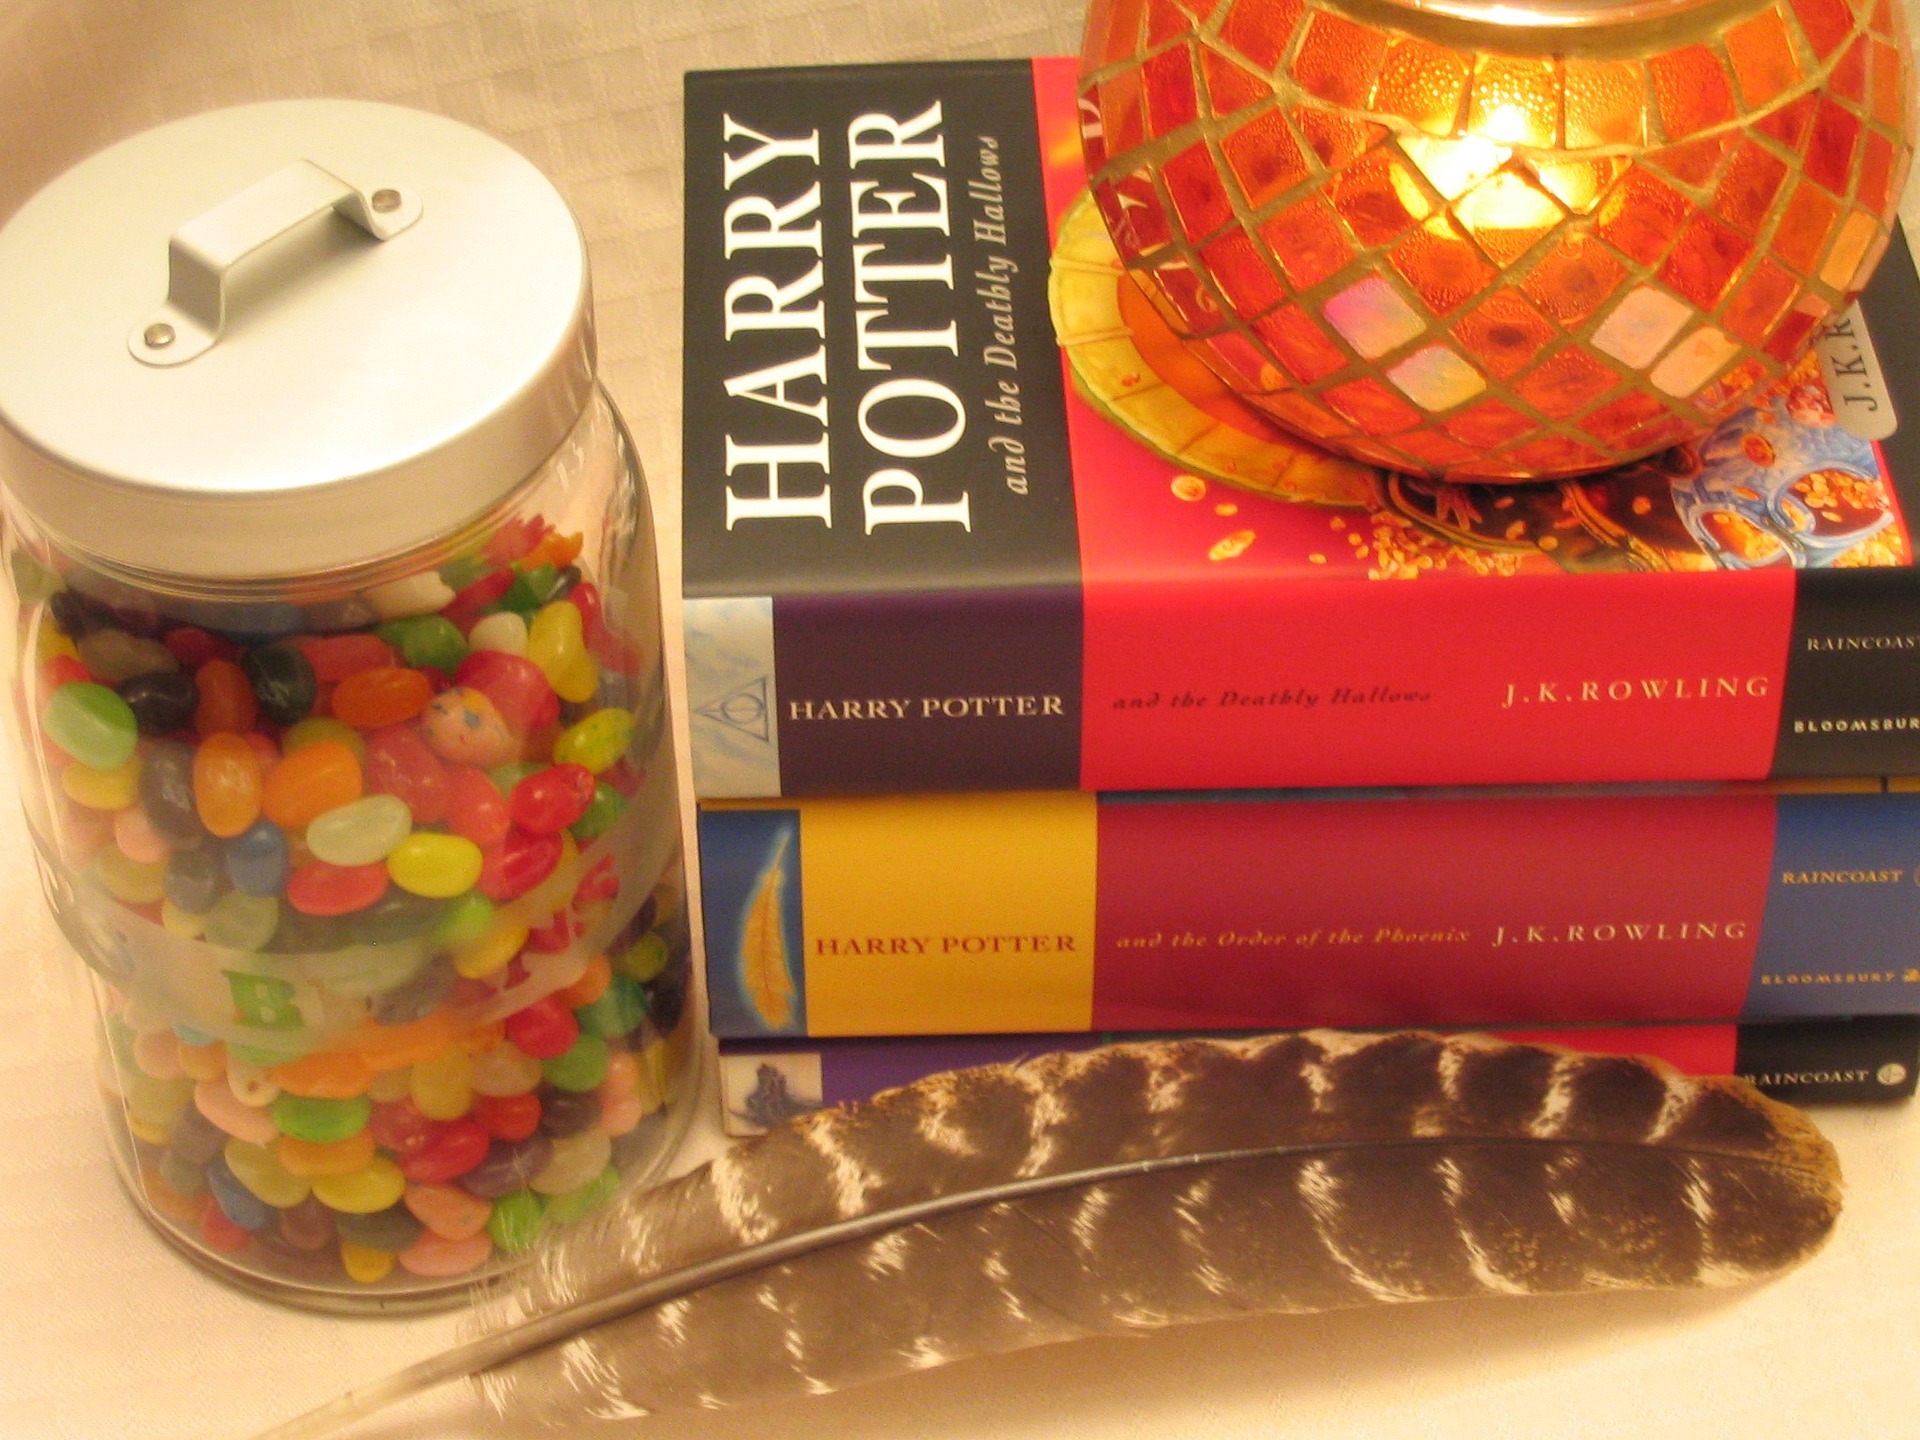 Harry Potter books, a feather, candy jar, and other container